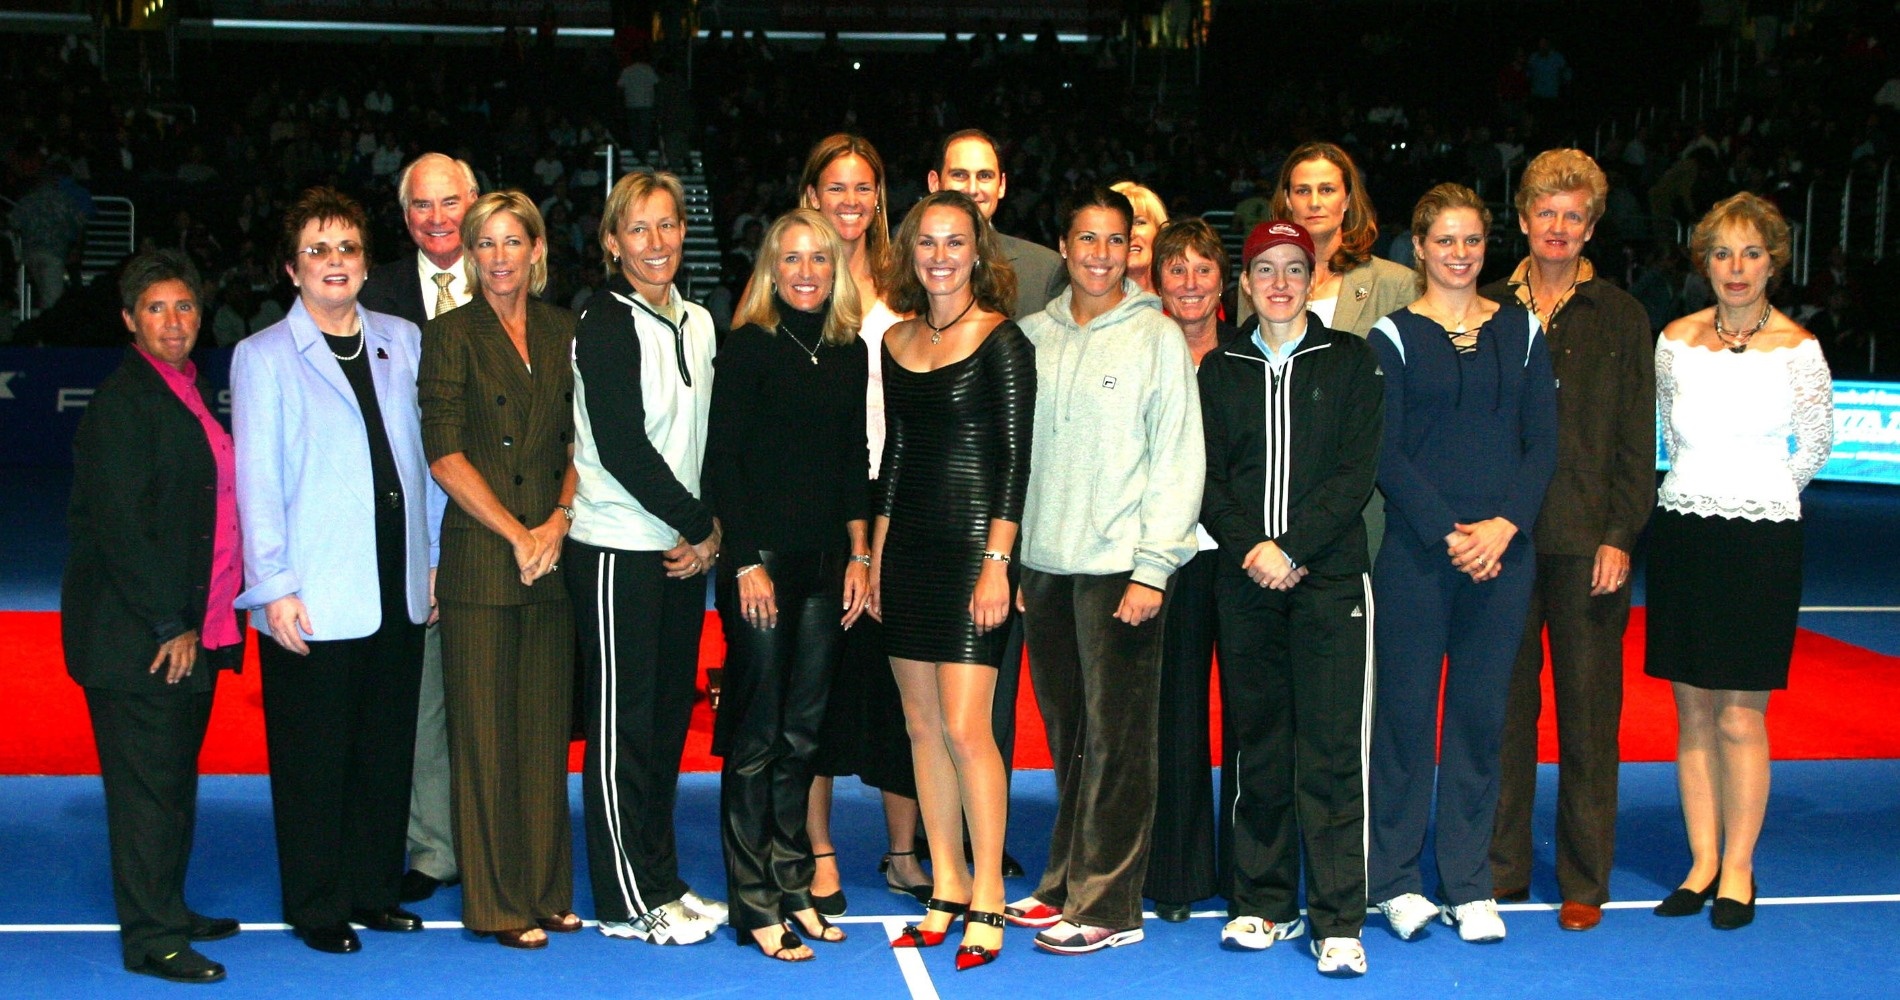 Players celebrating the 30 years of the WTA in 2003 at the WTA Masters